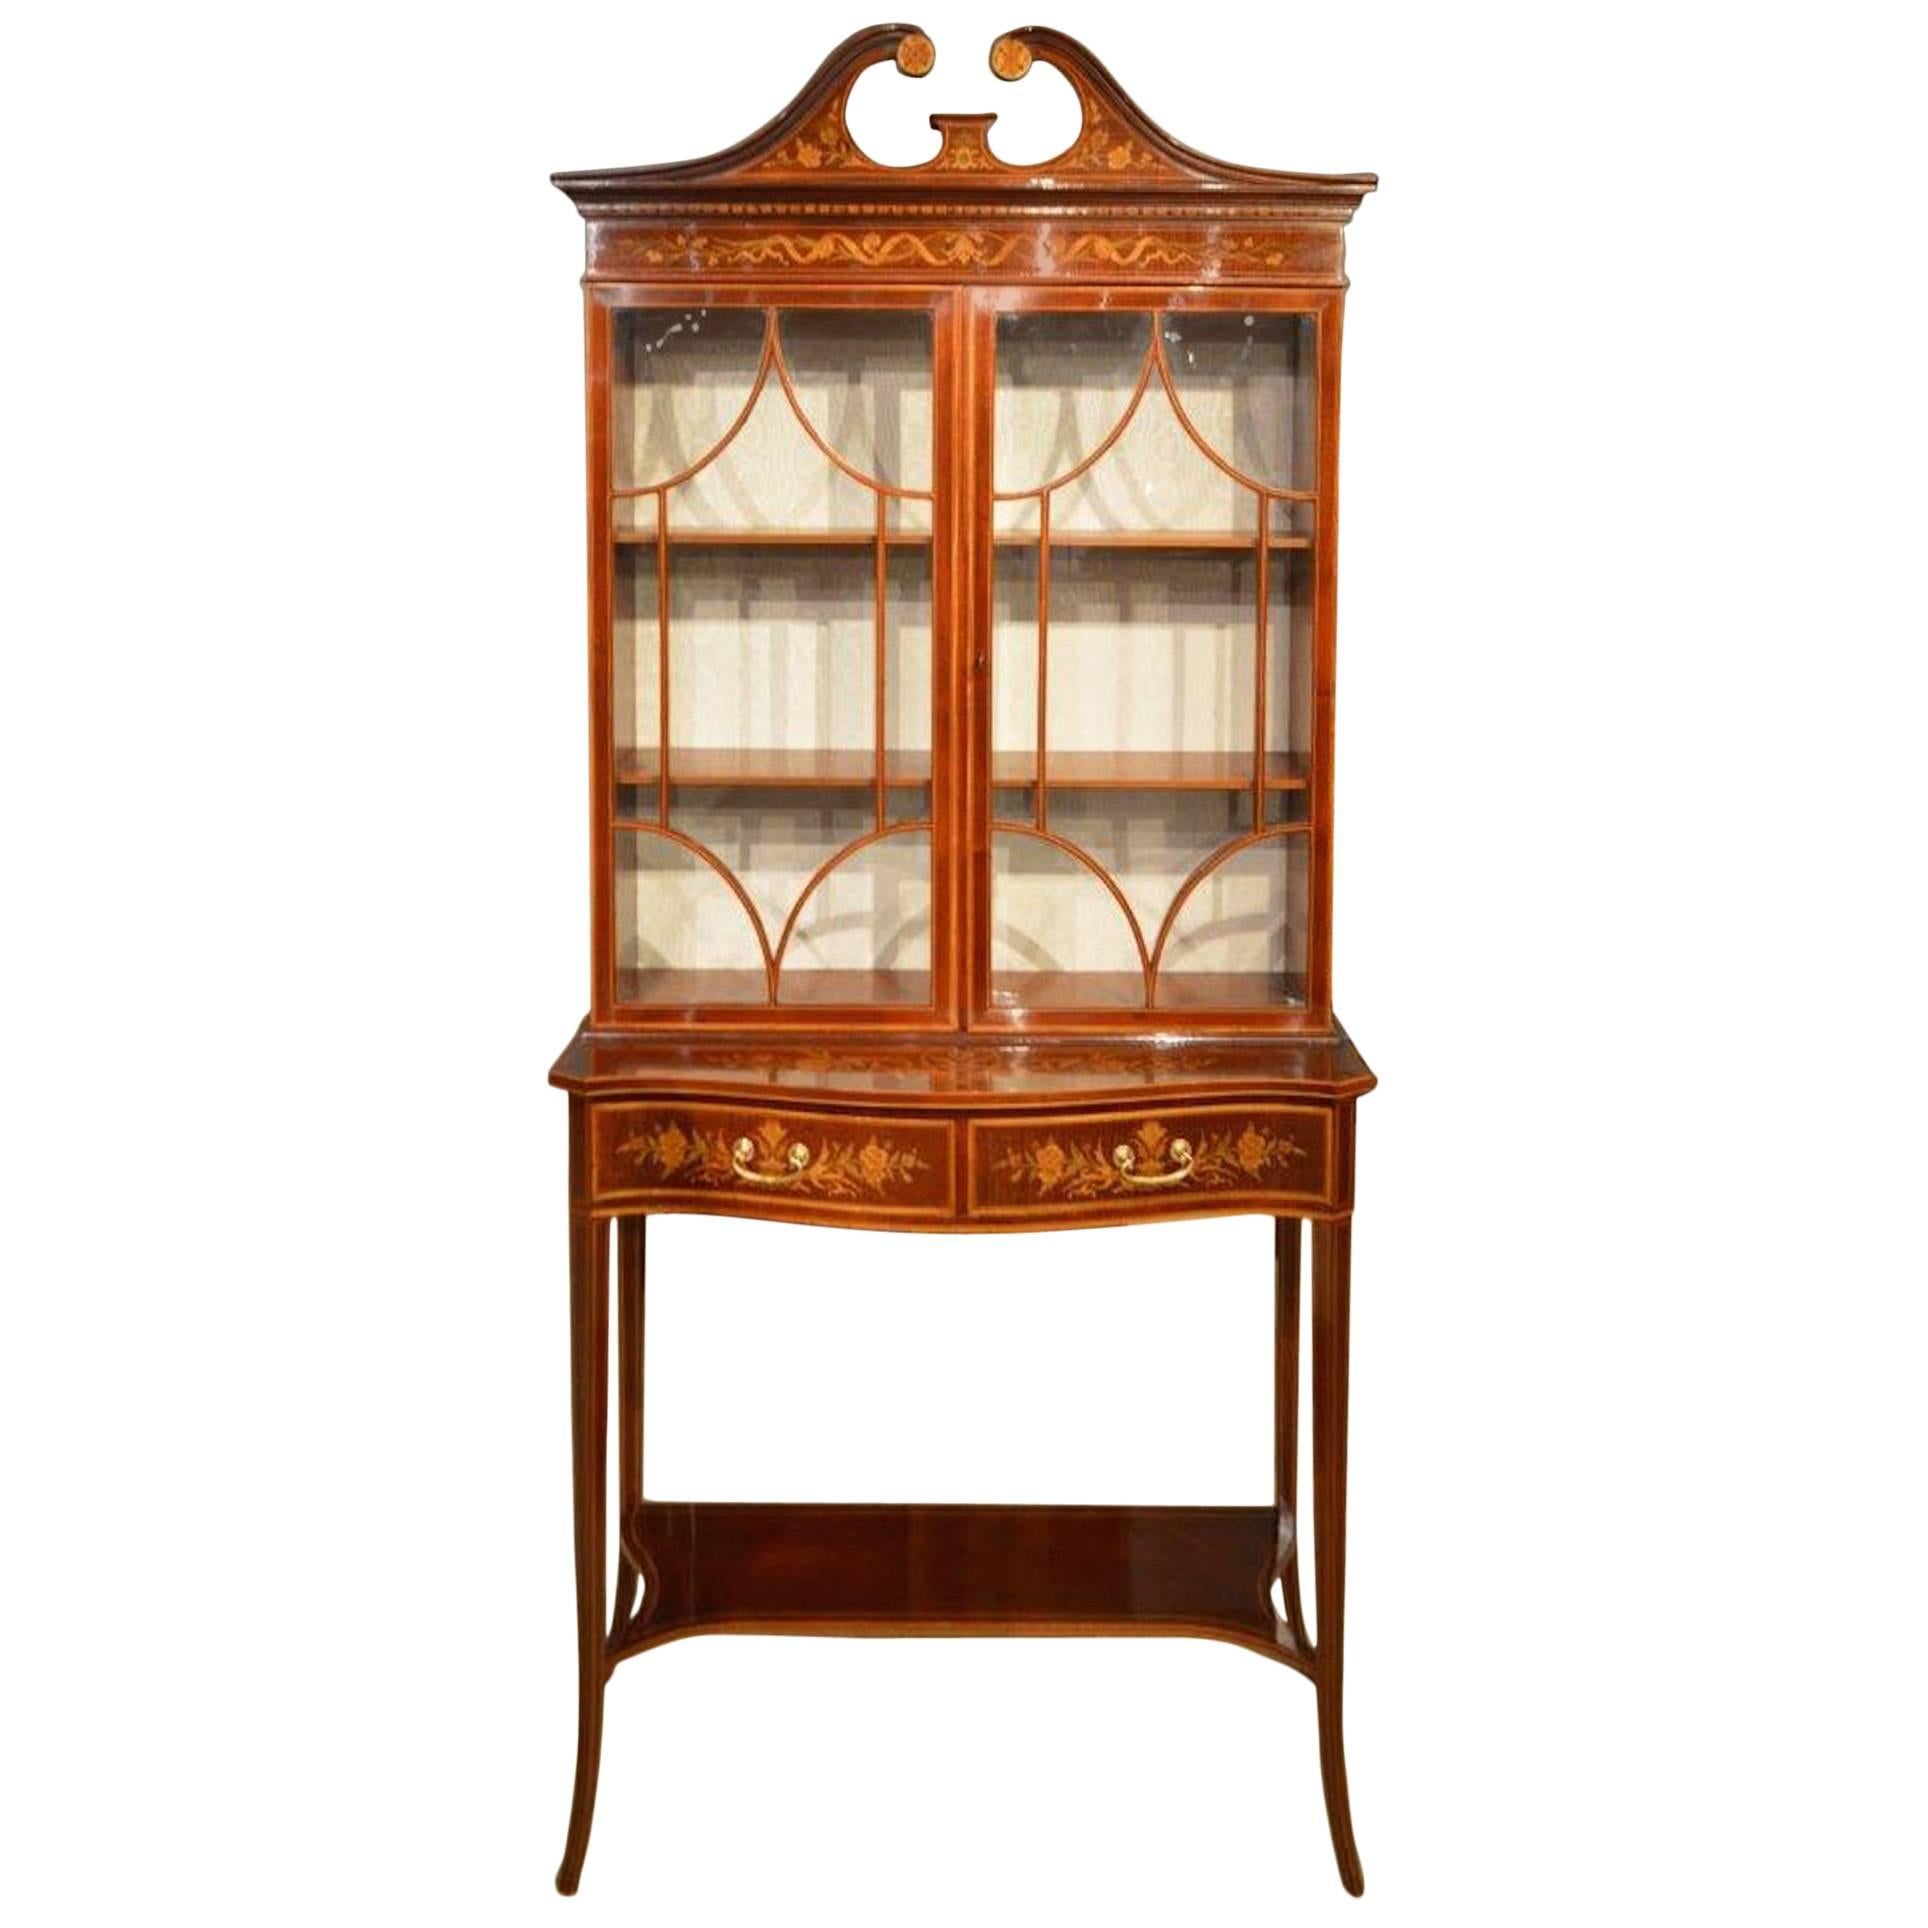 Edwardian Period Mahogany Inlaid Cabinet on Stand by Edwards & Roberts